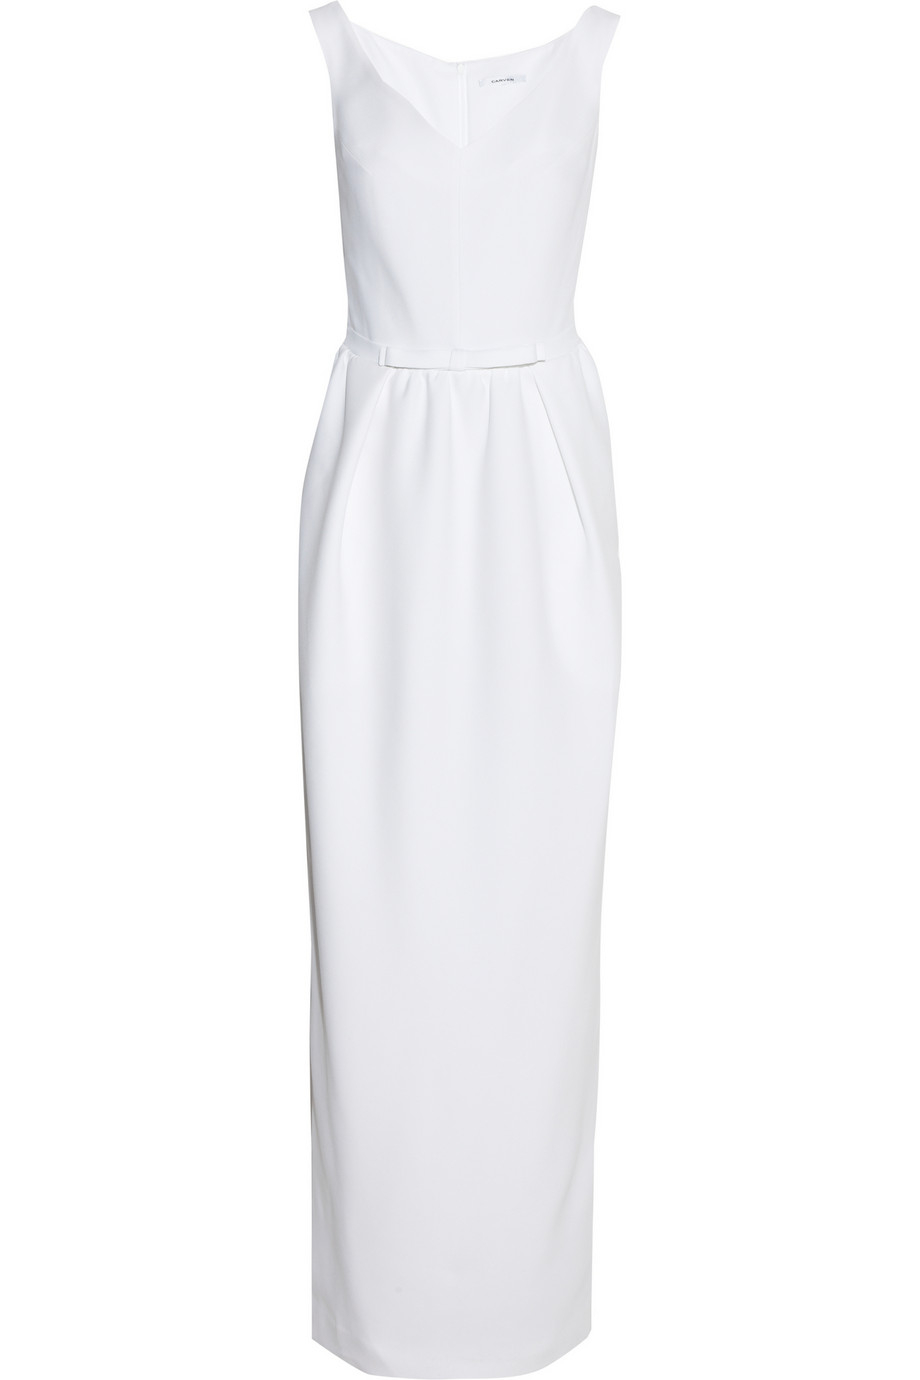 Lyst - Carven Crepe Maxi Dress in White